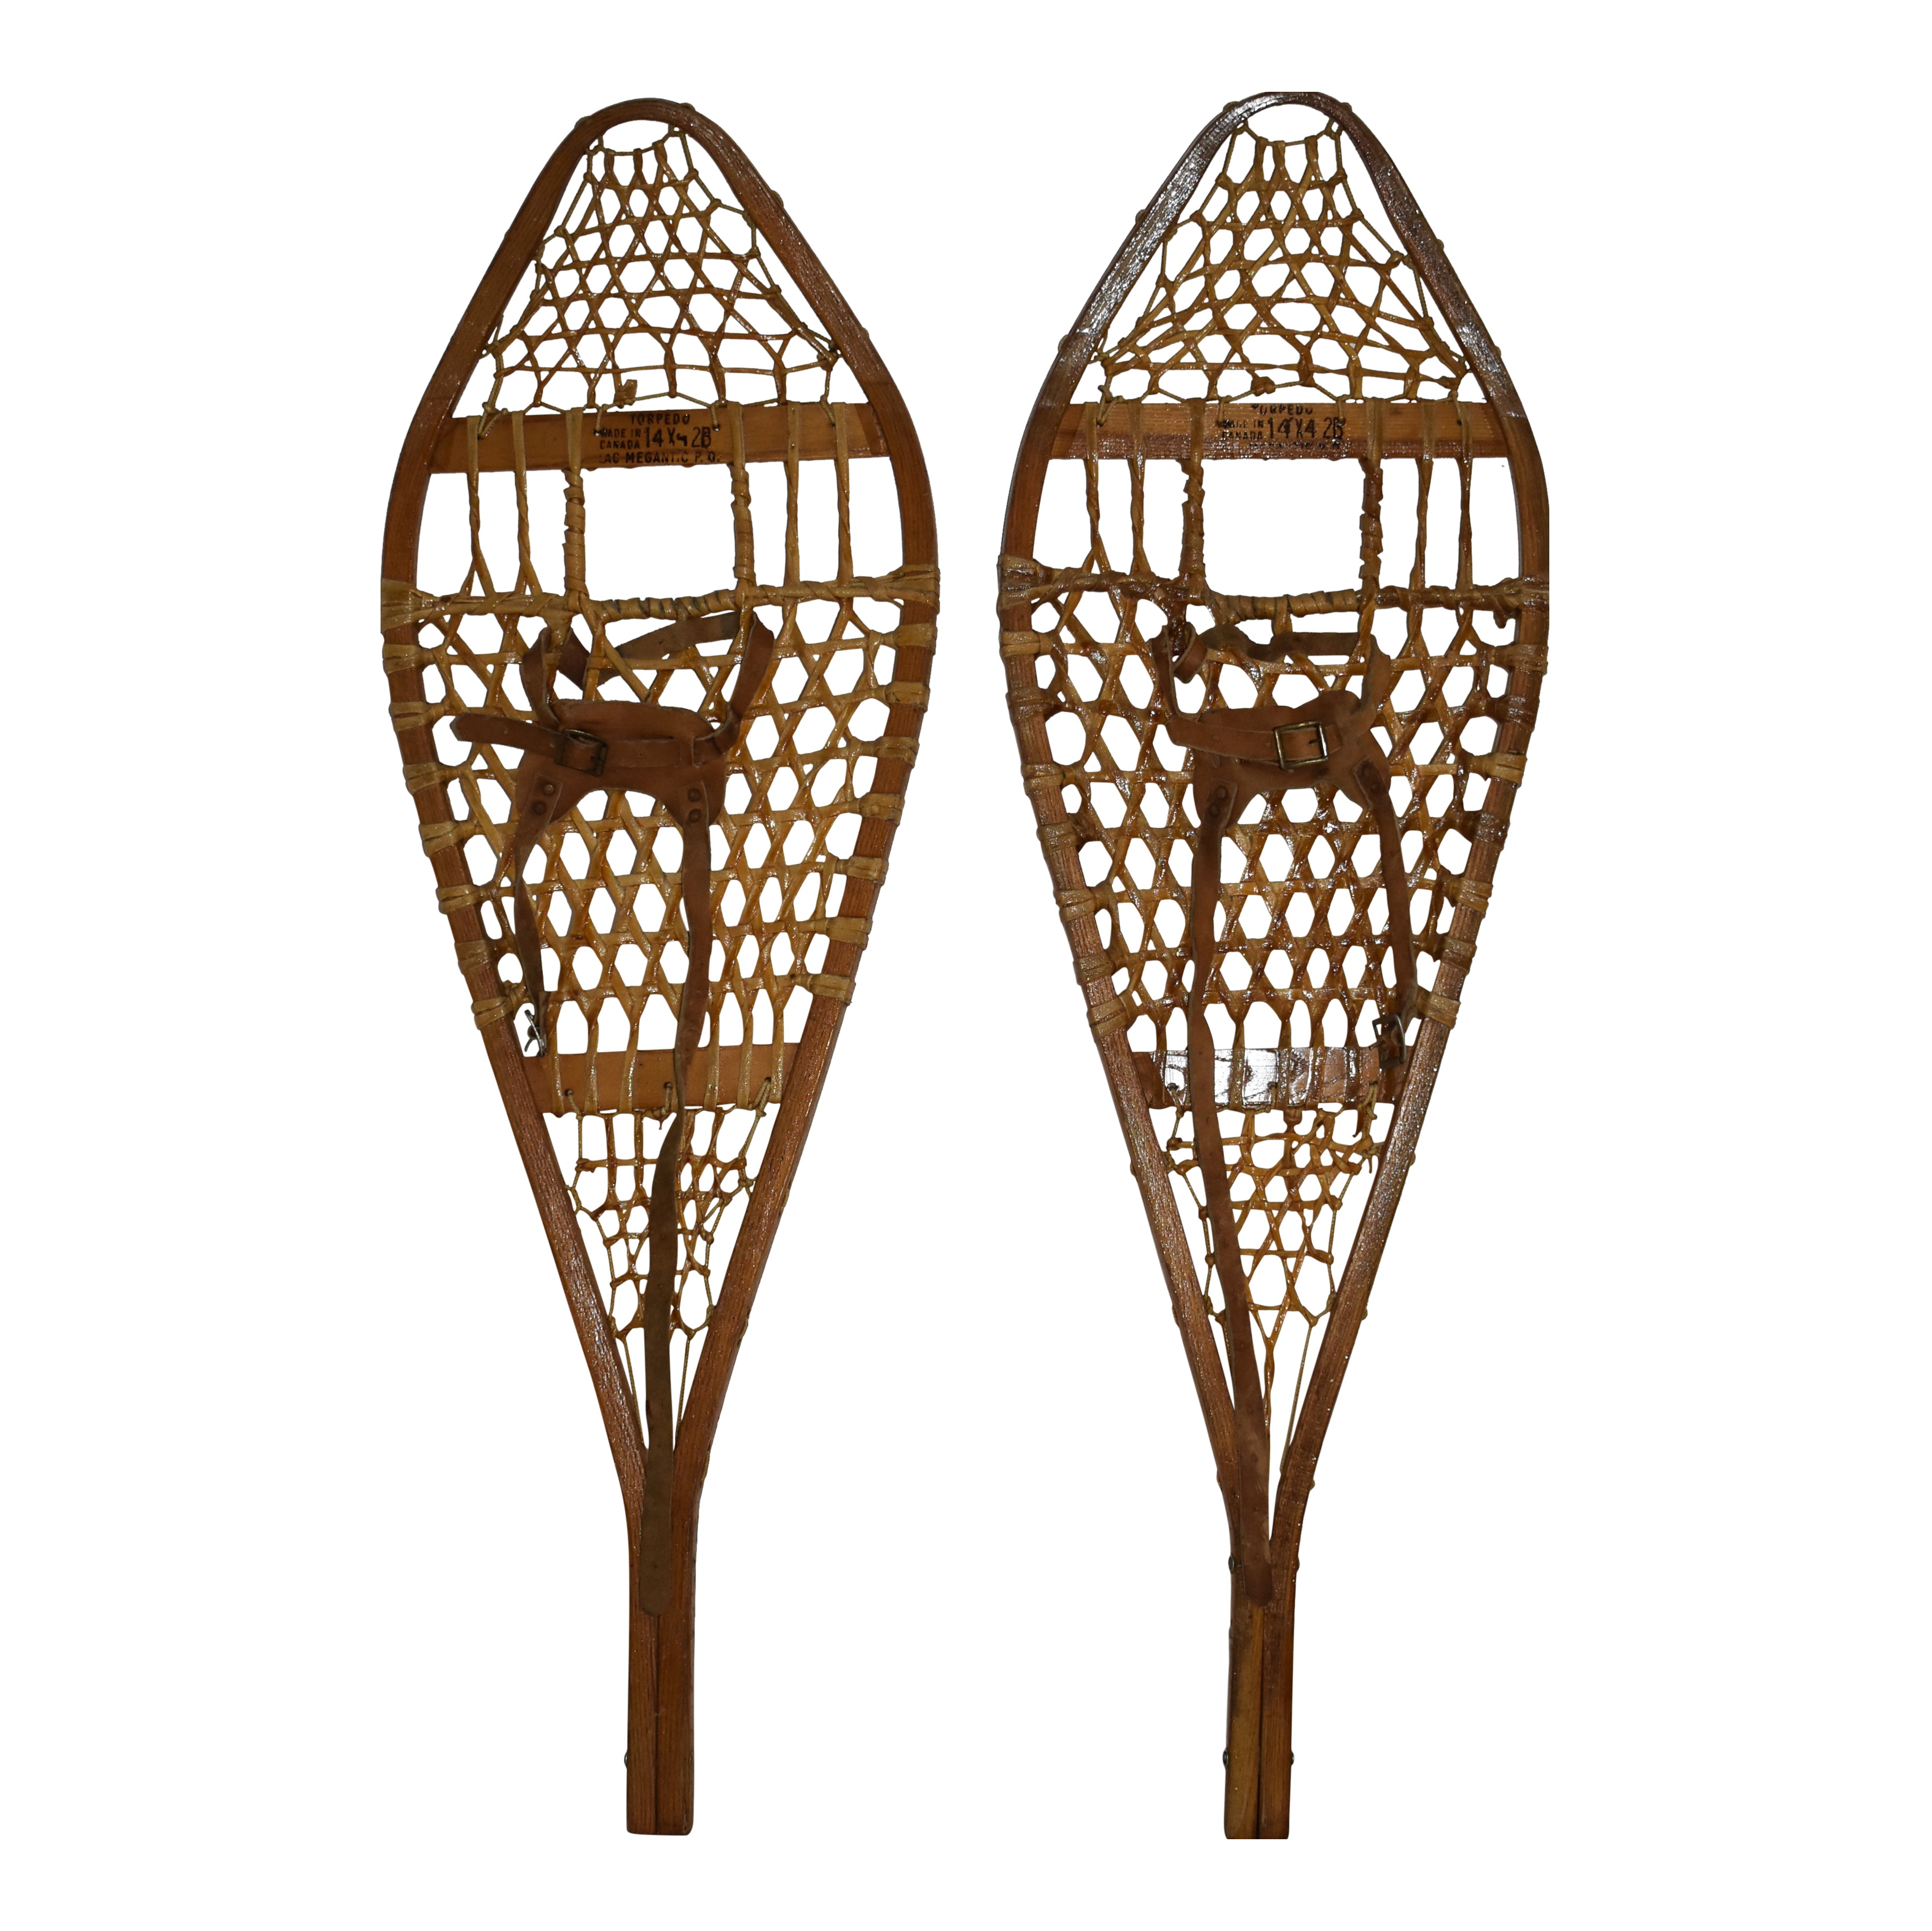 Canadian Huron Snowshoes by Torpedo